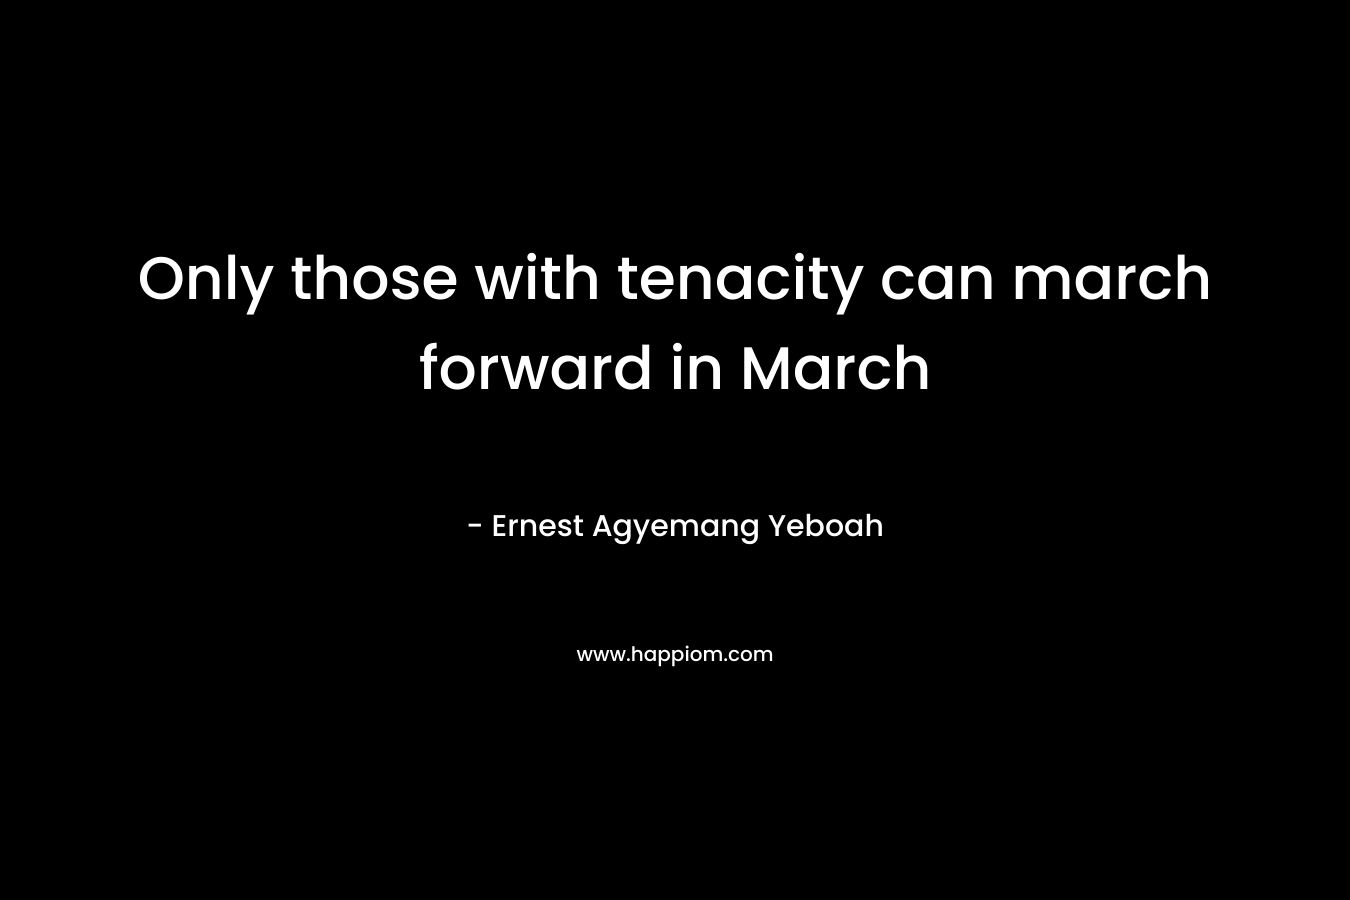 Only those with tenacity can march forward in March